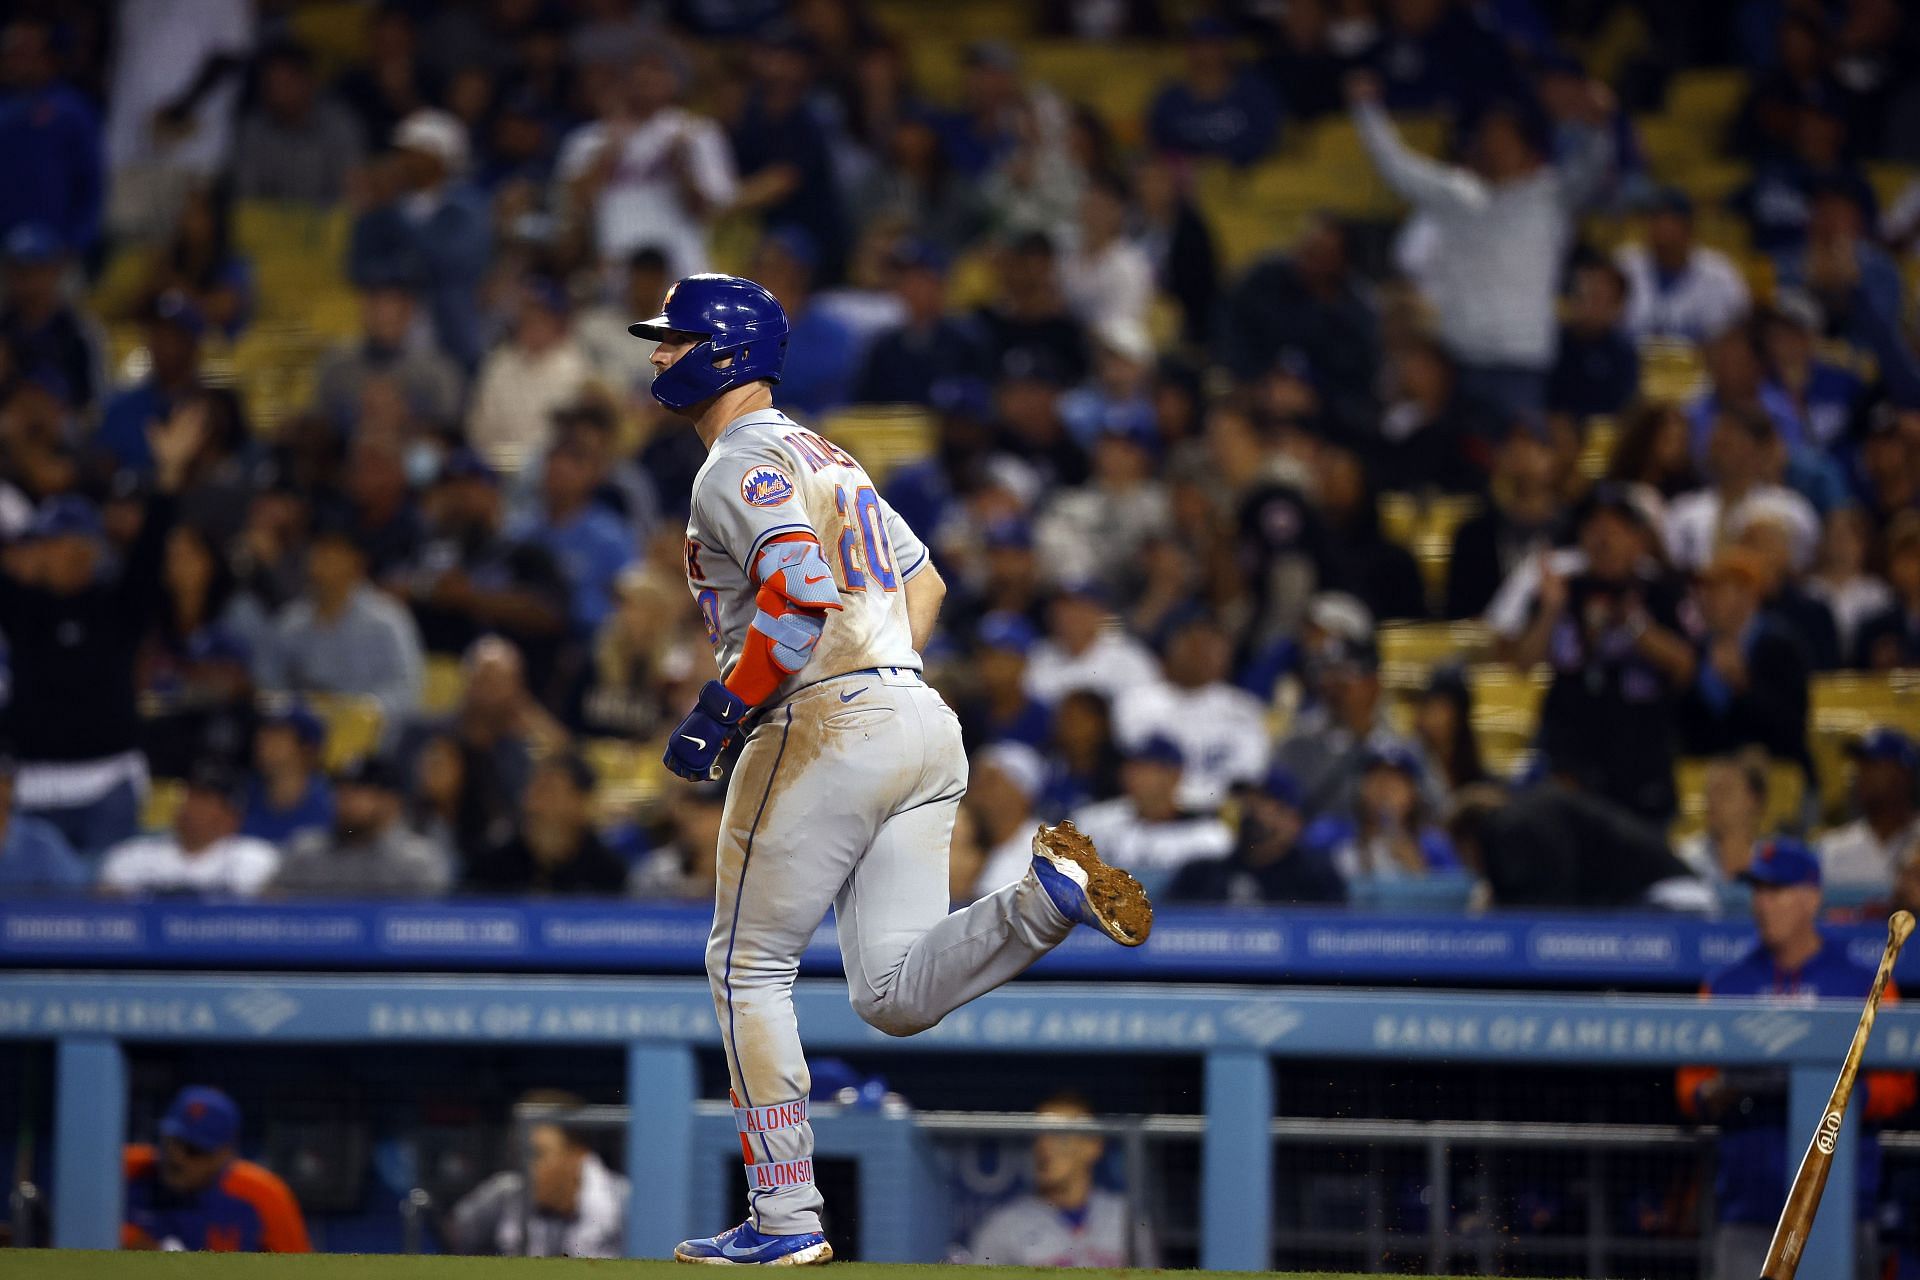 “WAY TO RESPOND PETE!!!” - NBA star Donovan Mitchell proves to be a New  York Mets fan as he cheers on Pete Alonso's huge night